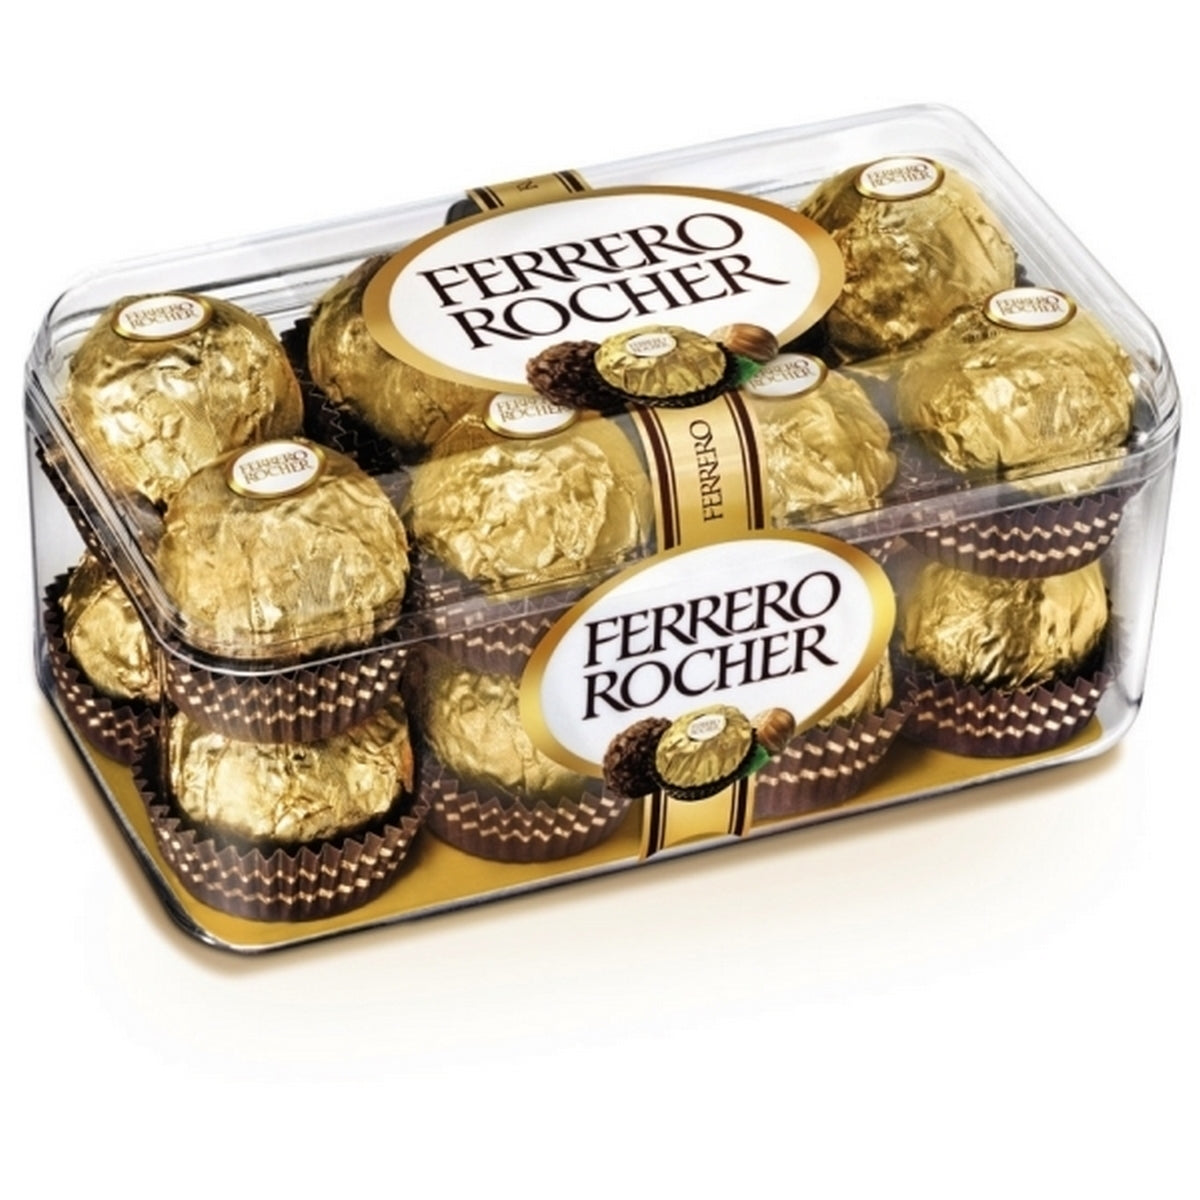 Designer Rakhi with Ferrero Rocher (16 pcs) and Roli Chawal Pack, Best Wishes Greeting Card 2